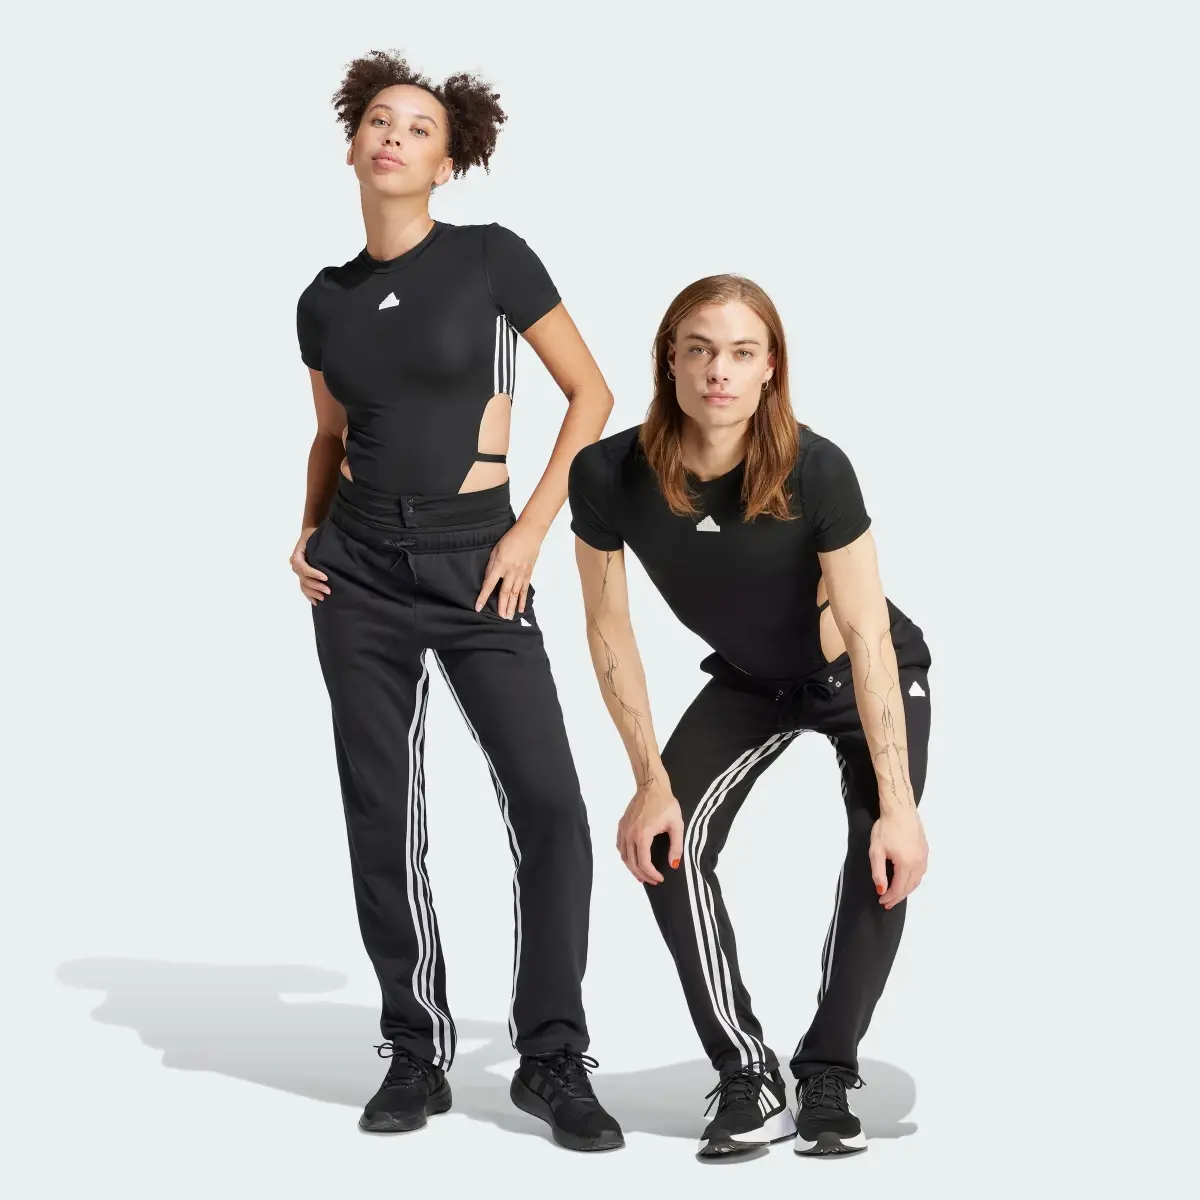 Adidas Express All-Gender Anti-Microbial Joggers. 1